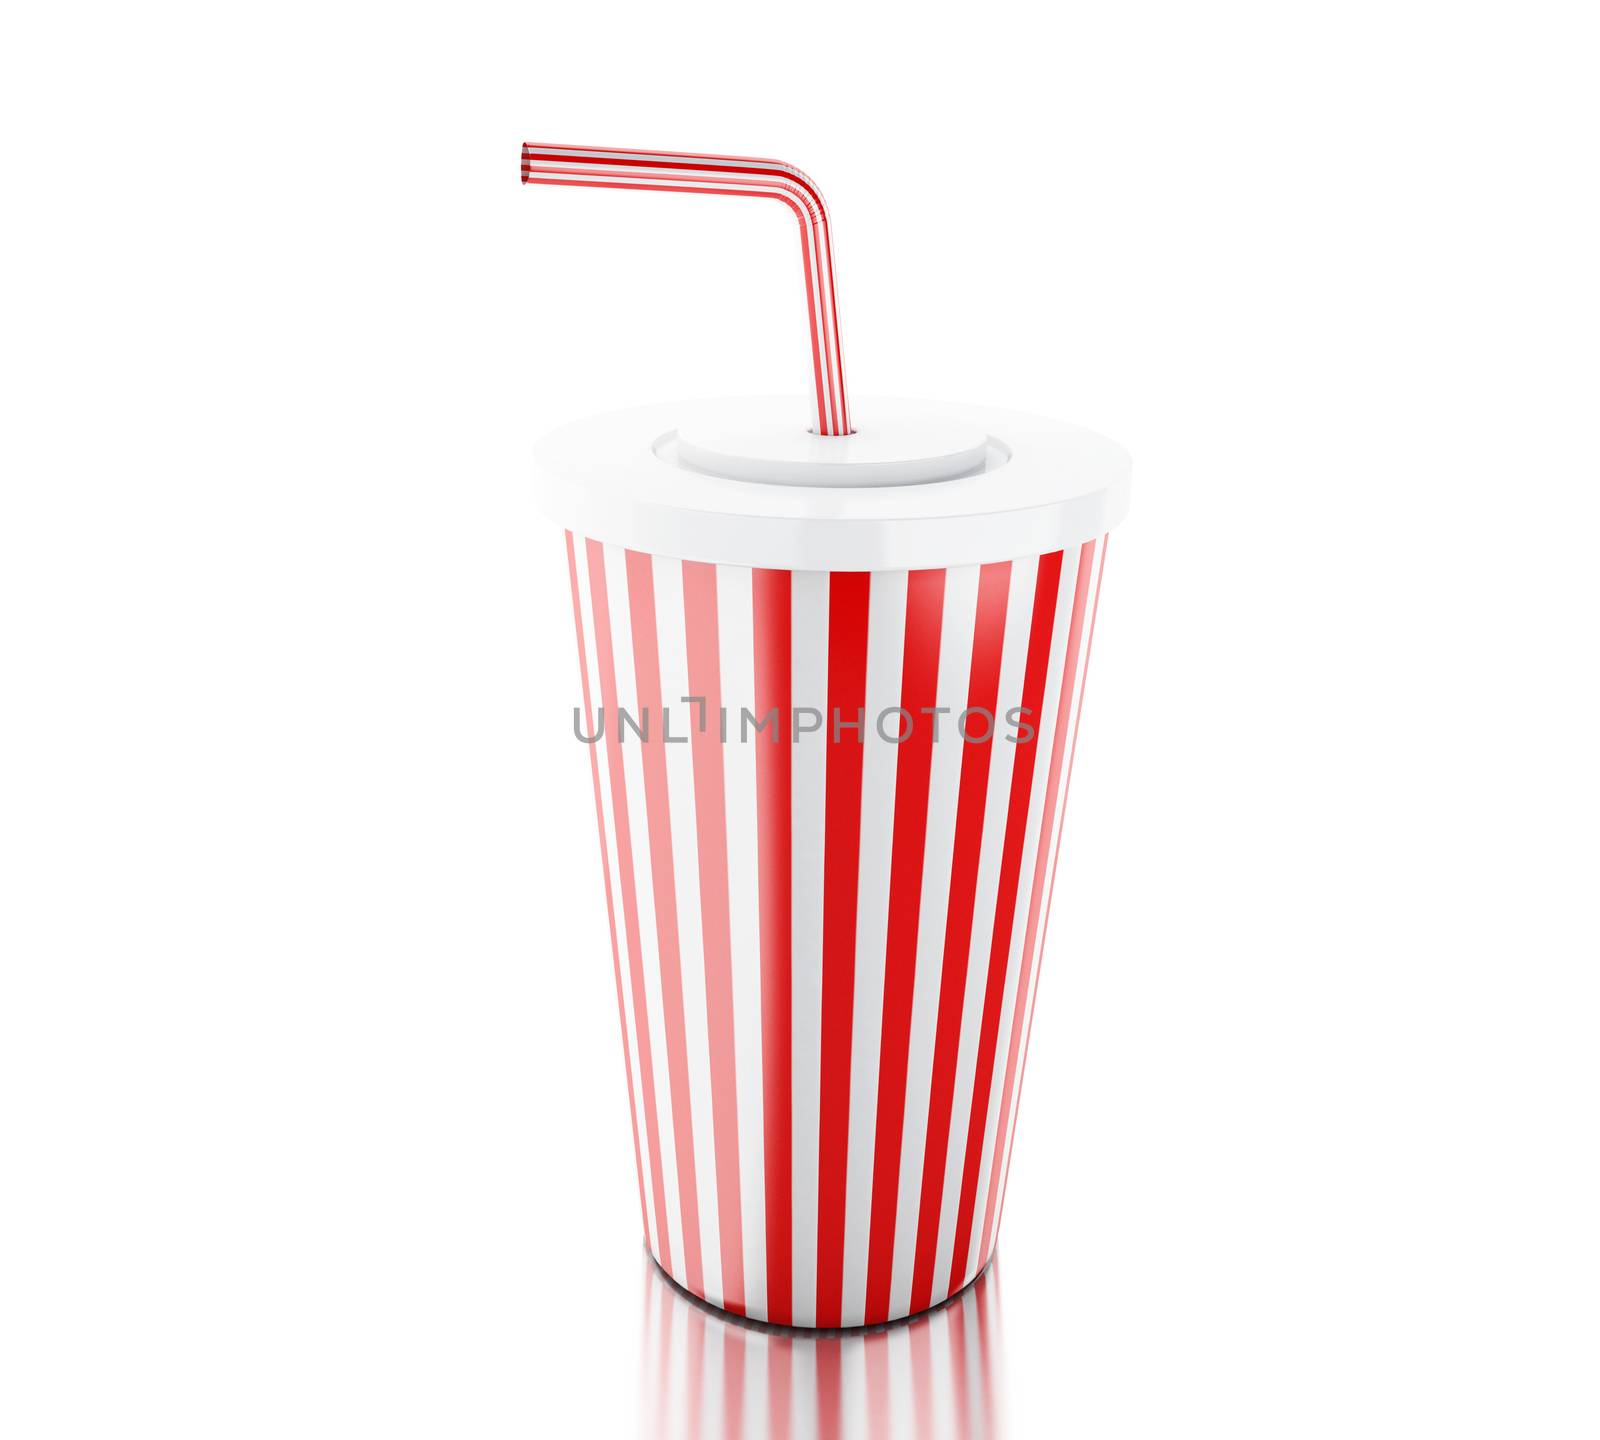 3d illustration. Plastic fastfood cup with stripes and straw. Isolated white background